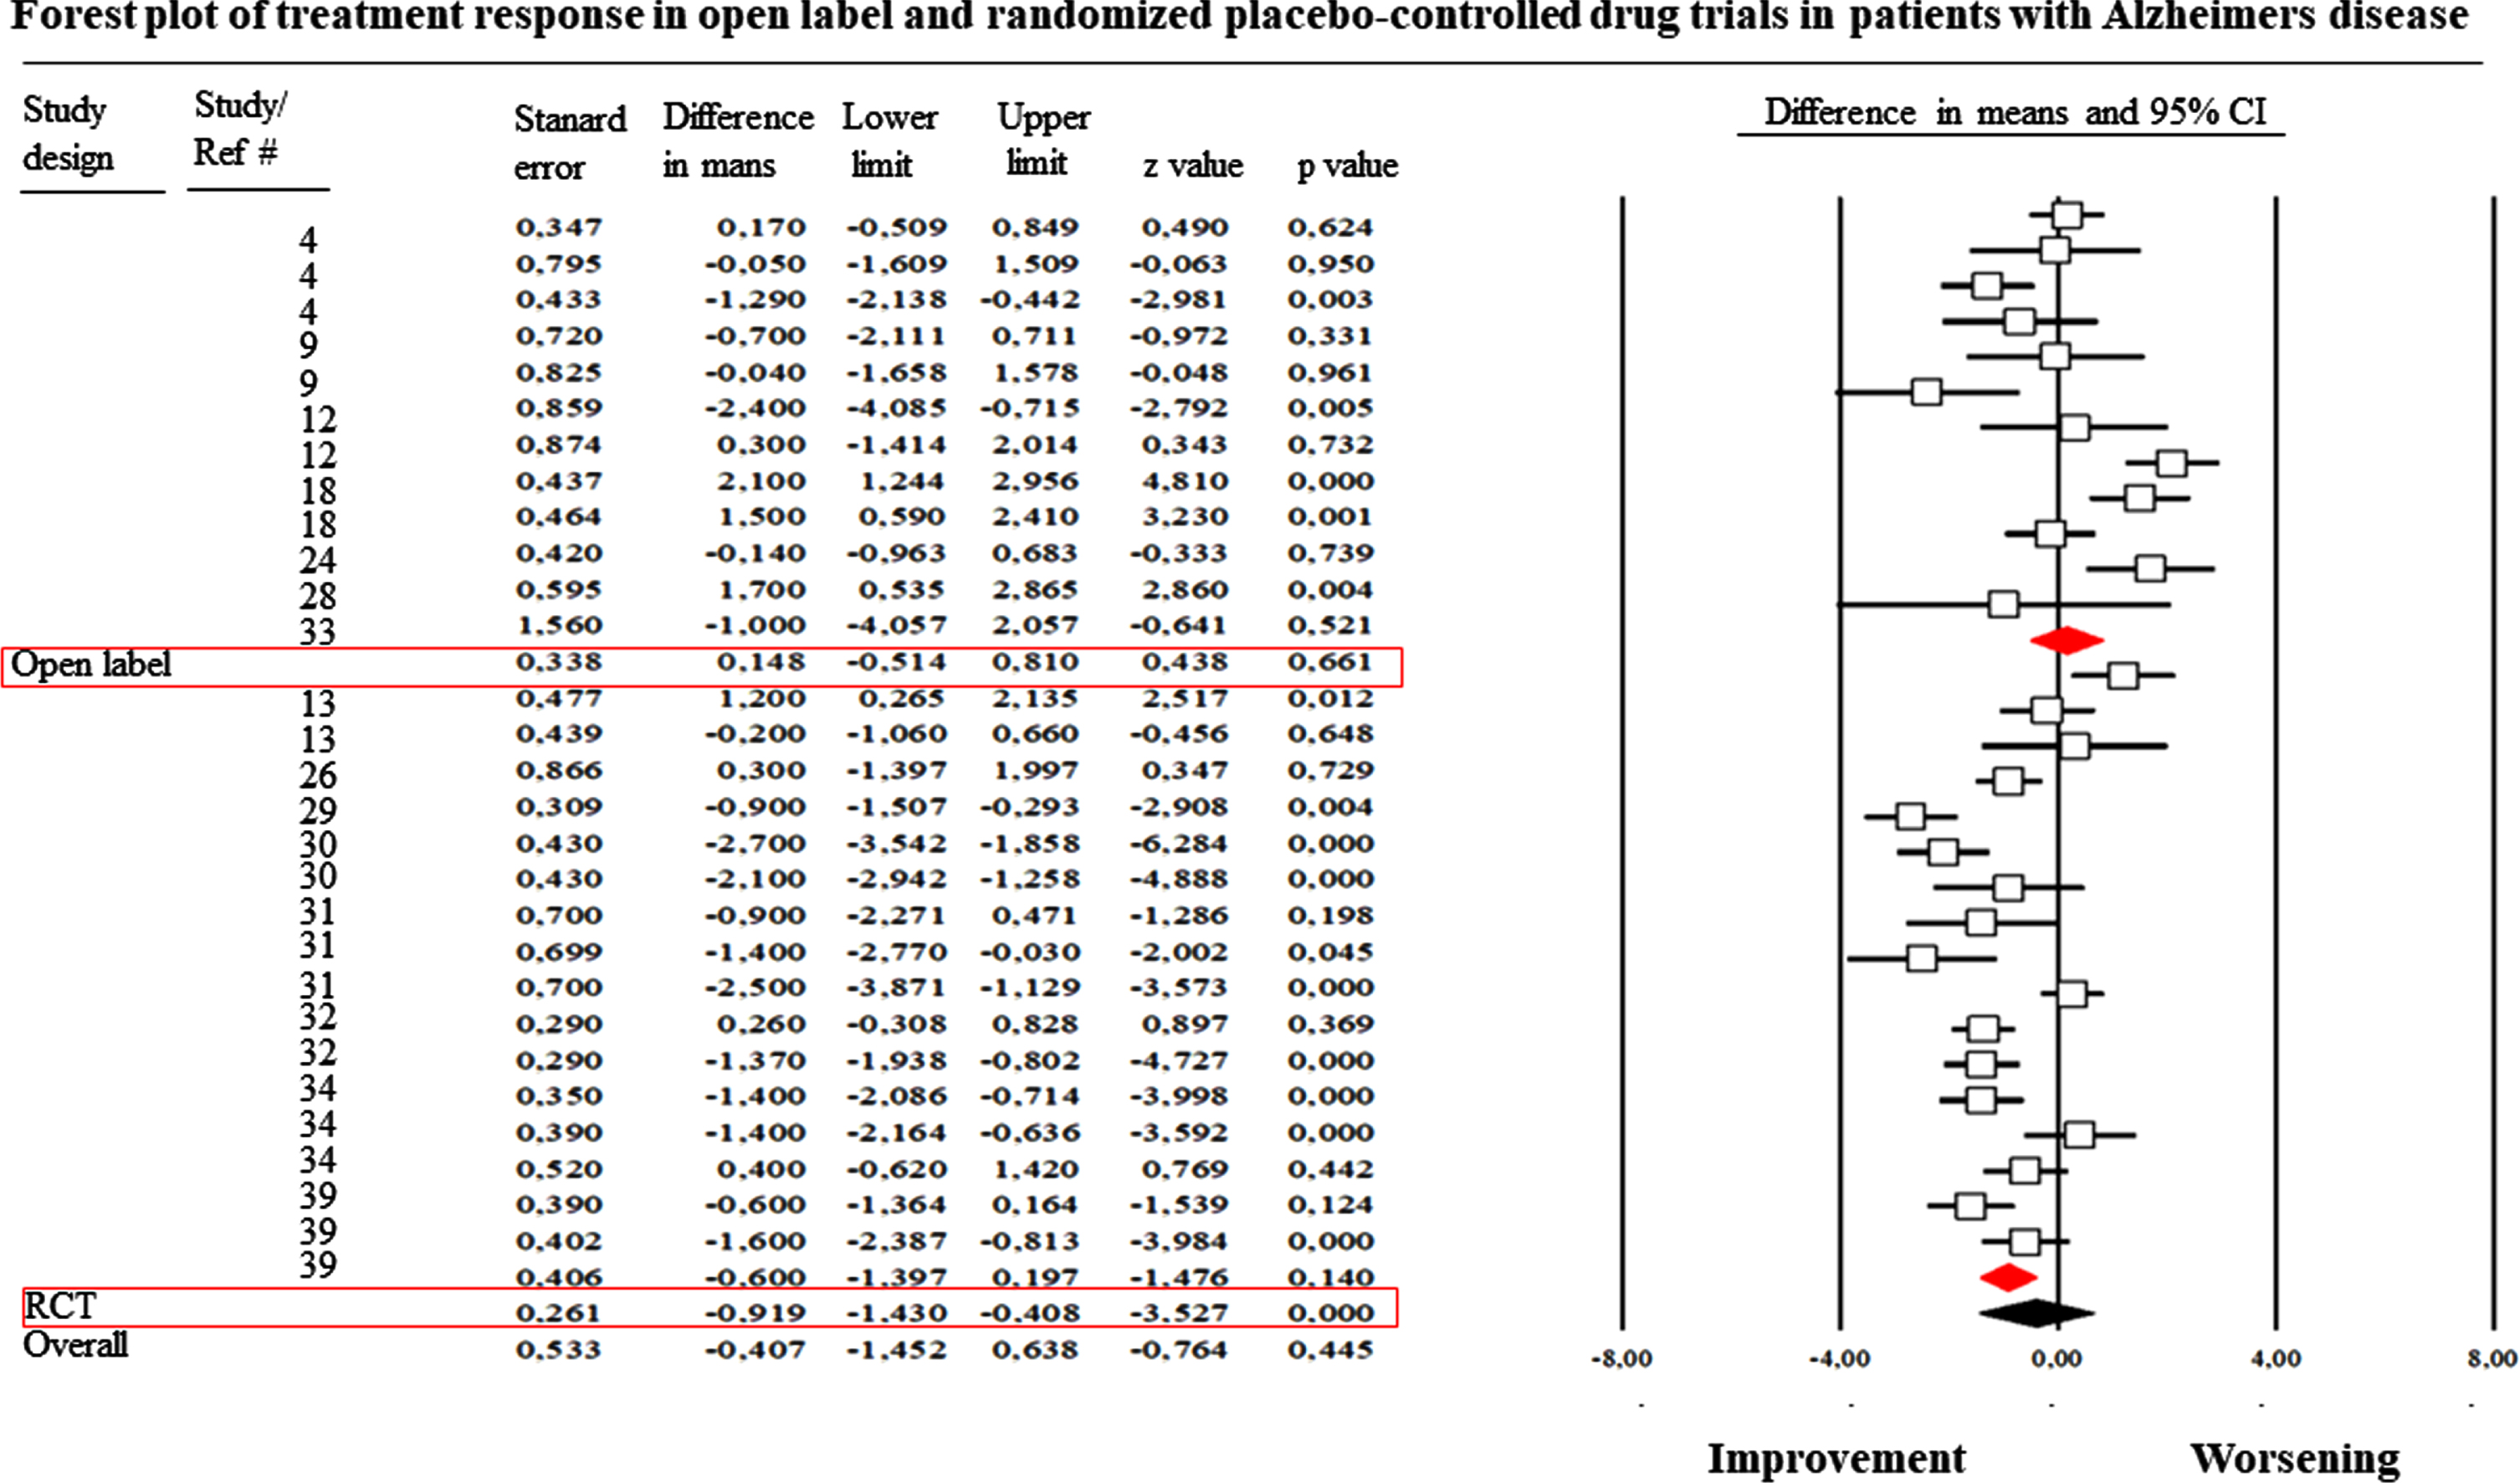 Forest plot of treatment responses in open-label and RCT pharmacological trials in AD patients. When studies included more than one outcome measure, they were reported as separate studies.